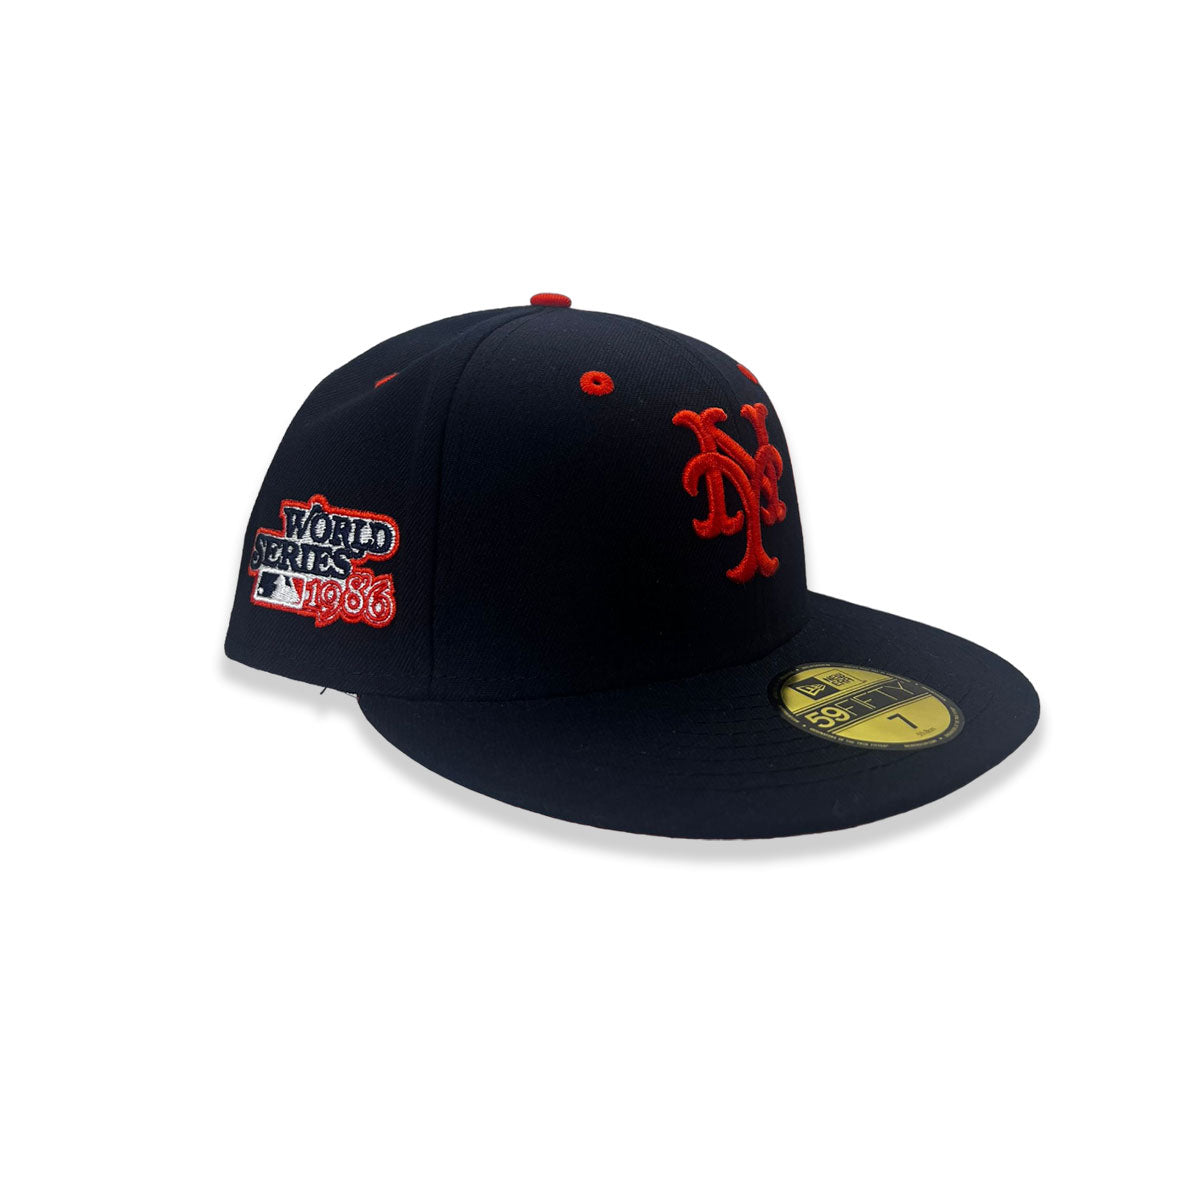 New Era New York Mets World Series 1986 Patch 59Fifty Fitted